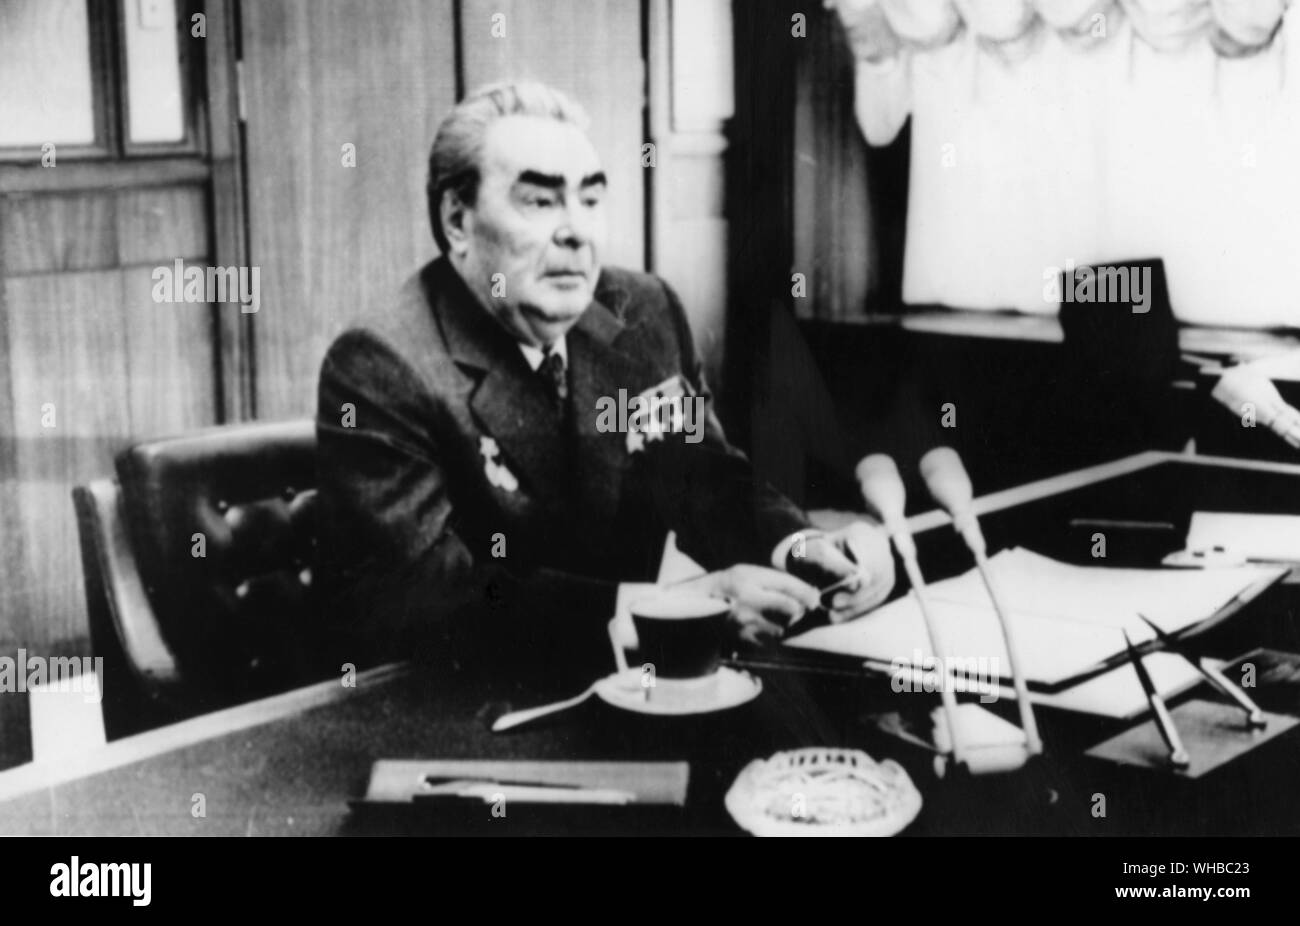 Sitting of the Constitutional commission under the chairmanship of Chairman of Constitutional commission, General Secretary of CCCCPSU, President of USSR Supreme Soviet President L. I. Brezhnev took place in the Kremlin.. Leonid Ilyich Brezhnev (December 19, 1906 [O.S. December 6, 1906] - November 10, 1982) was General Secretary of the Communist Party of the Soviet Union (and thus political leader of the USSR) from 1964 to 1982, serving in that position longer than anyone other than Joseph Stalin. He was twice Chairman of the Presidium of the Supreme Soviet (head of state), from 1960 to 1964 Stock Photo